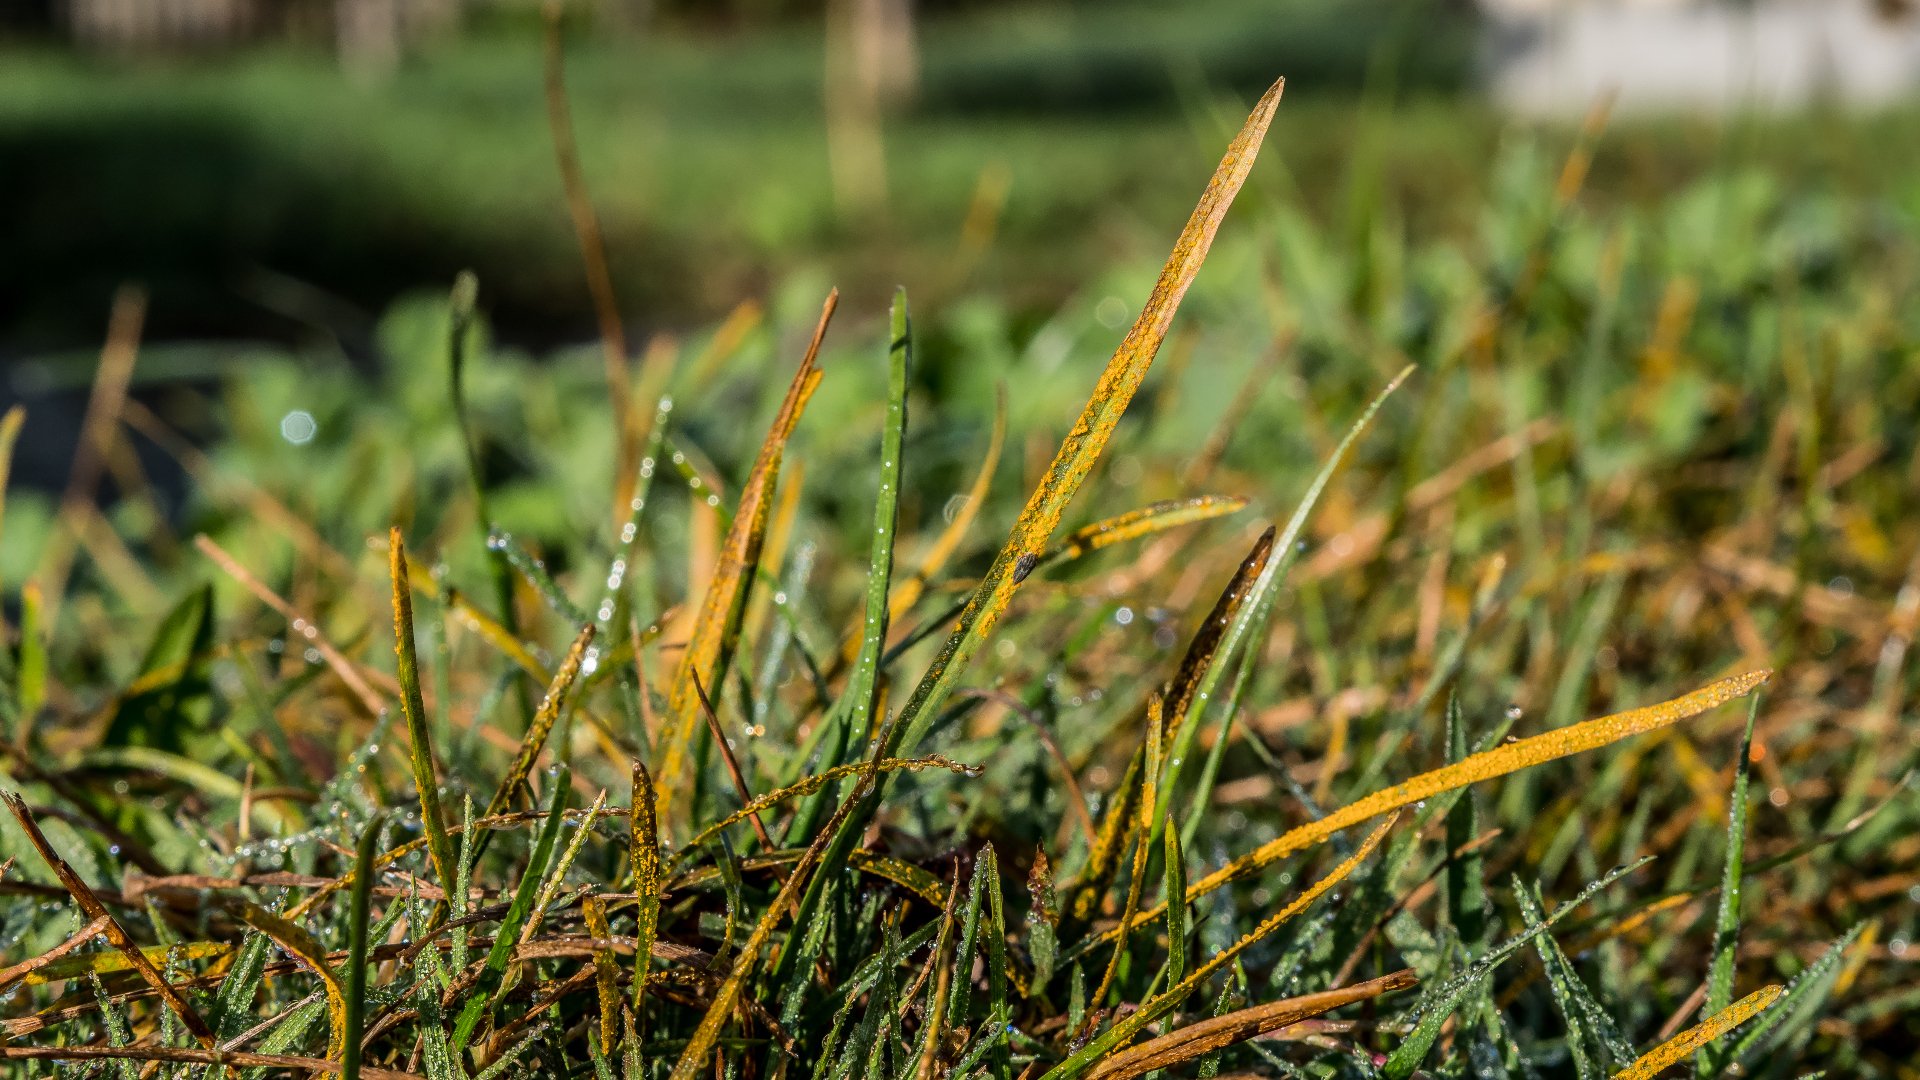 Lawn Rust - How to Identify & Deal With This Lawn Disease